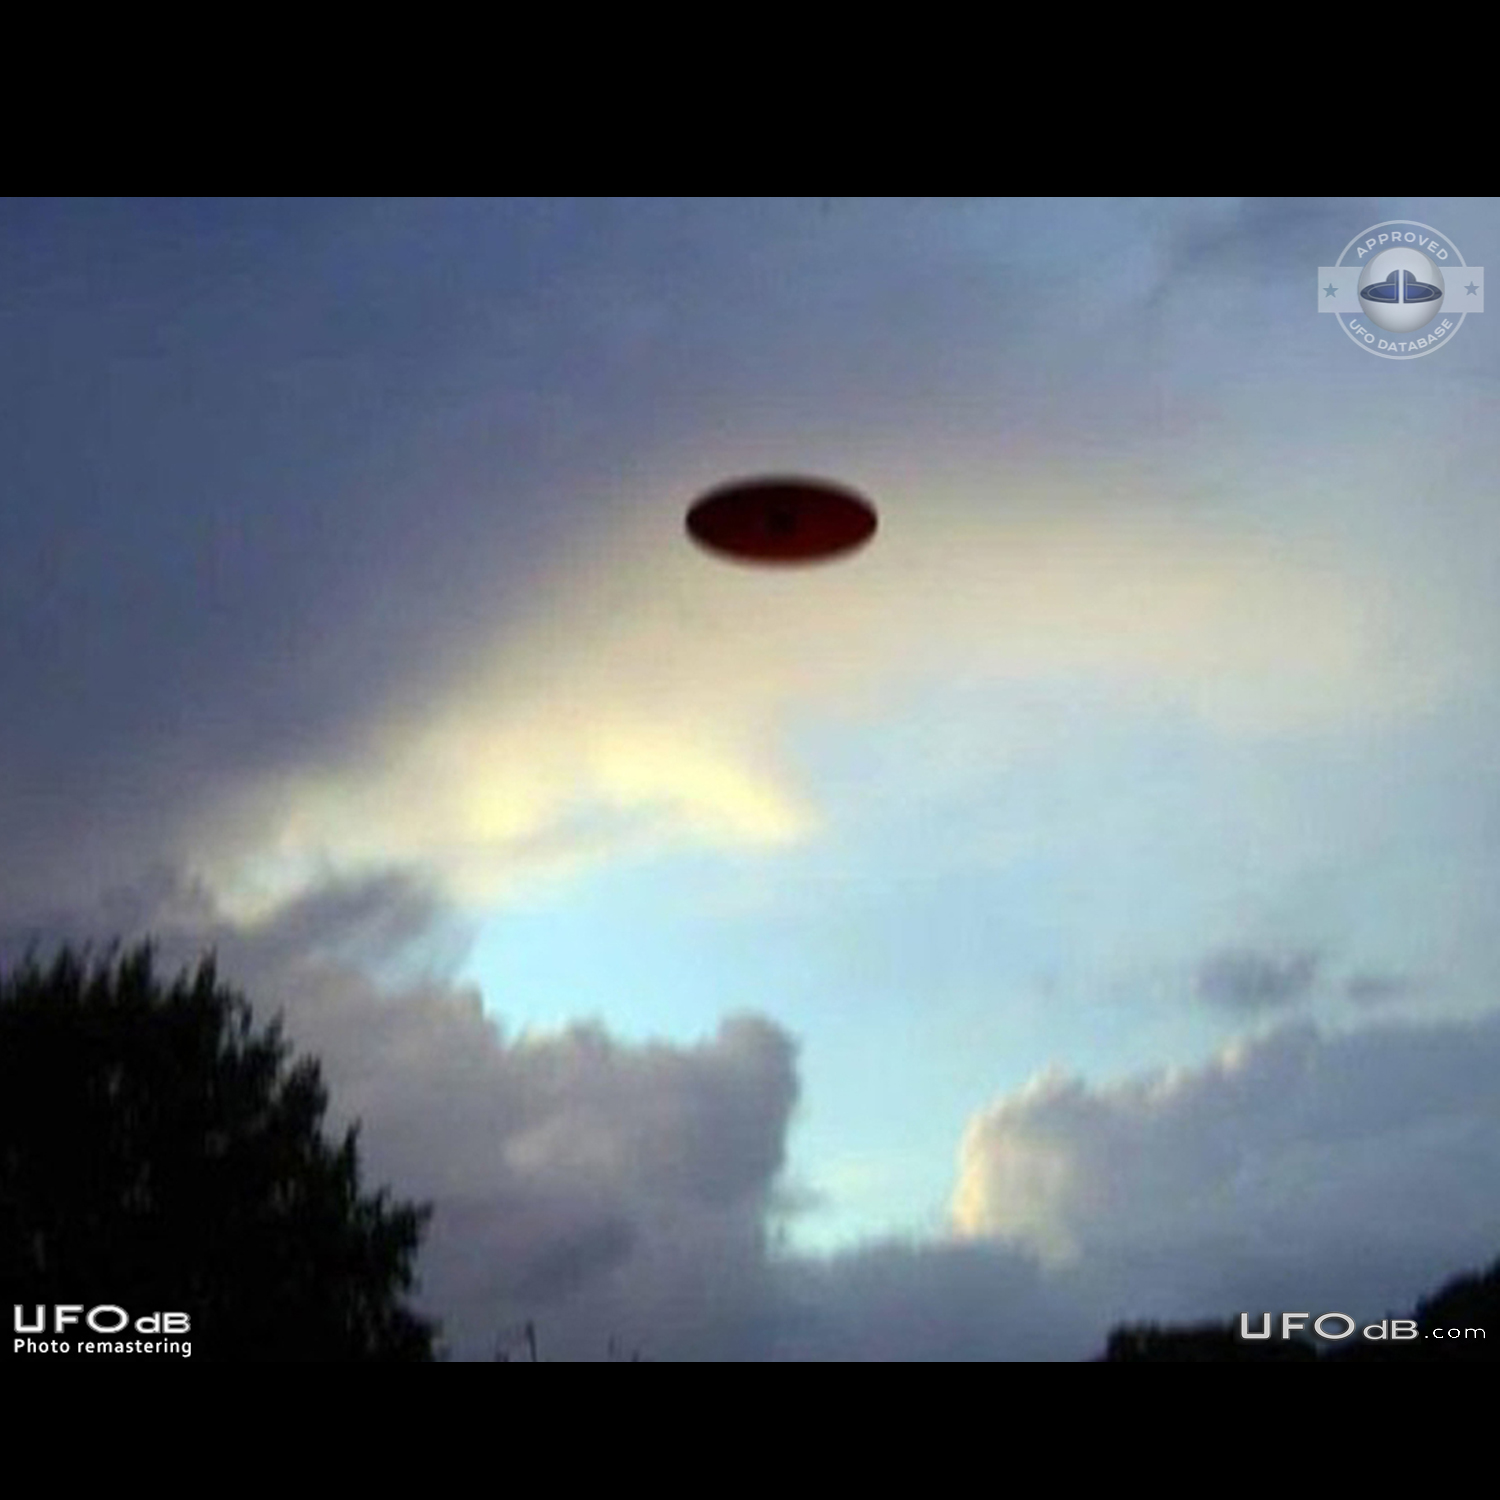 Flying saucer UFO with buzzing noise seen in Shrewsbury, Shropshire En UFO Picture #850-1